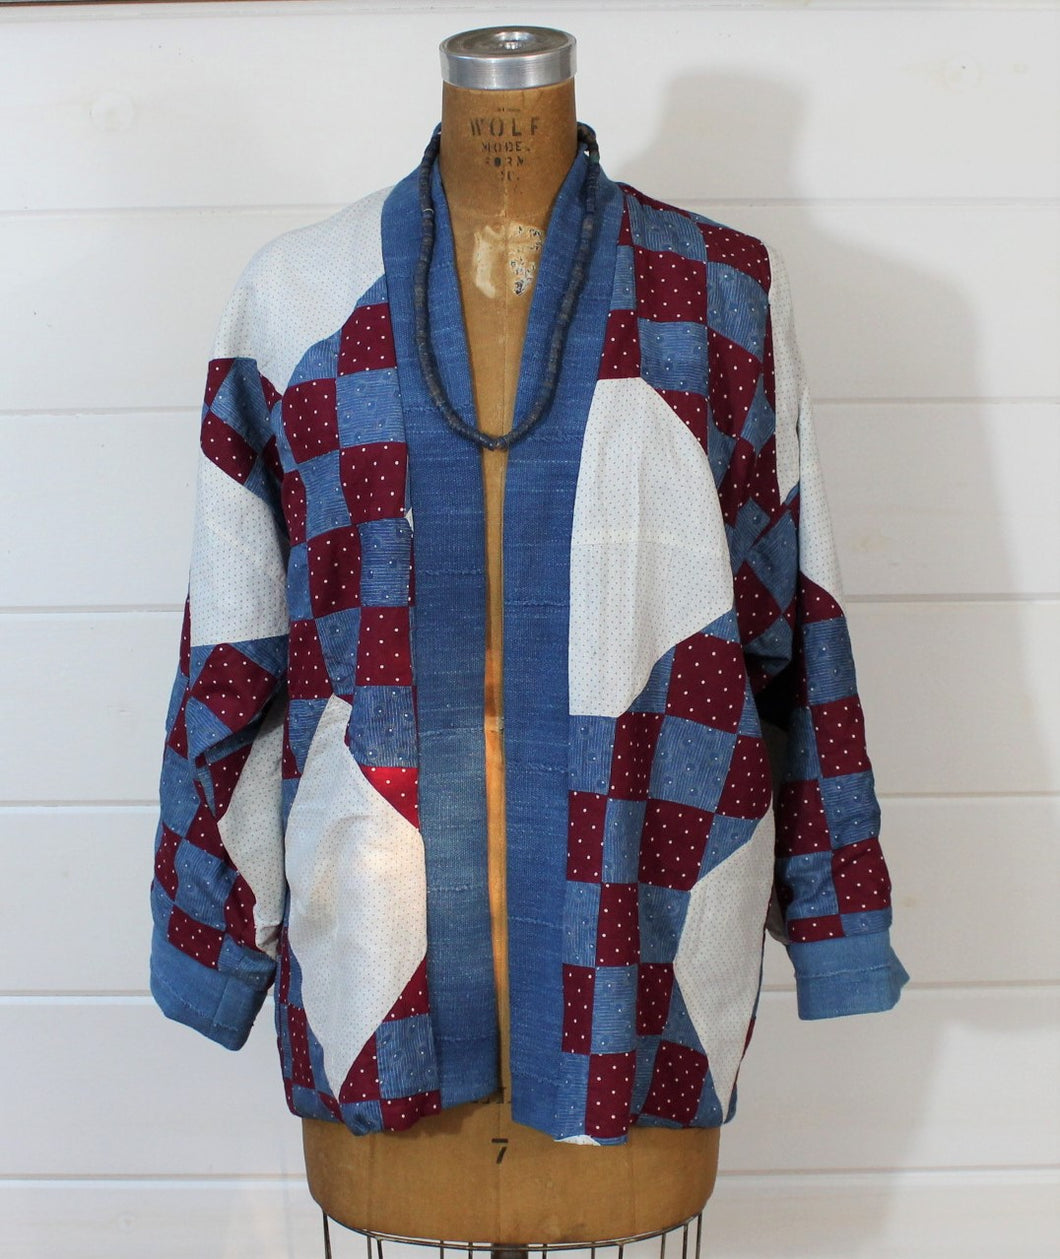 Indigo Calico Quilt jacket(available at our Palm Springs shop)